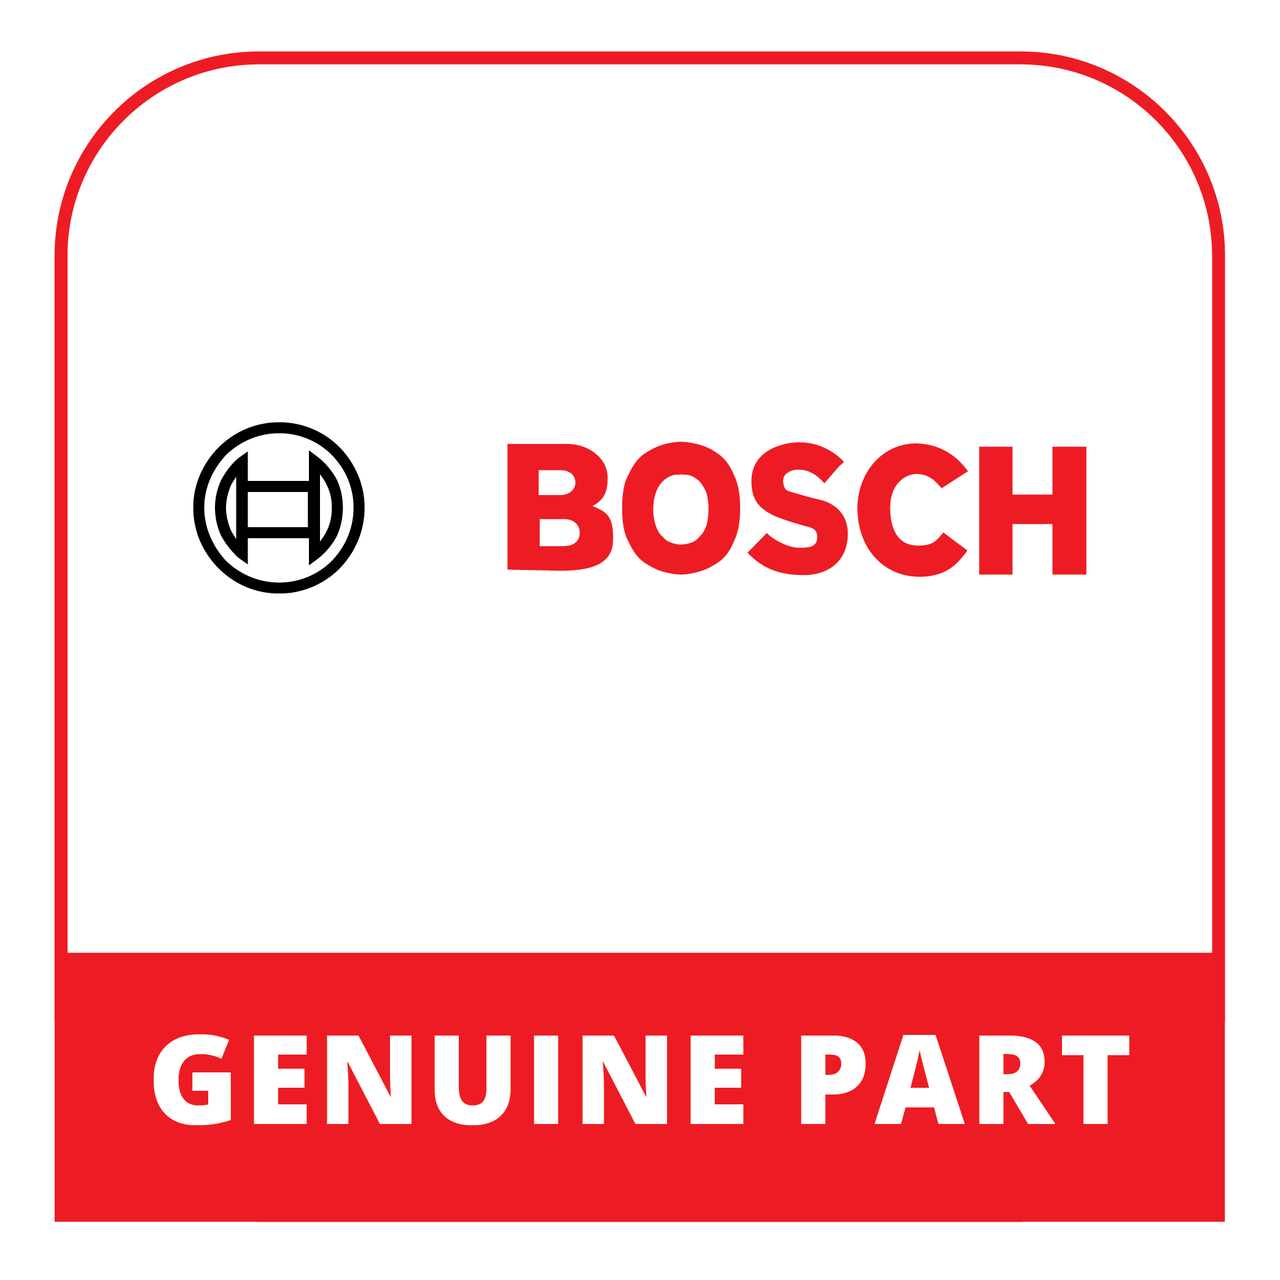 Bosch (Thermador) 12028836 - Display Module Programmed - Genuine Bosch (Thermador) Part